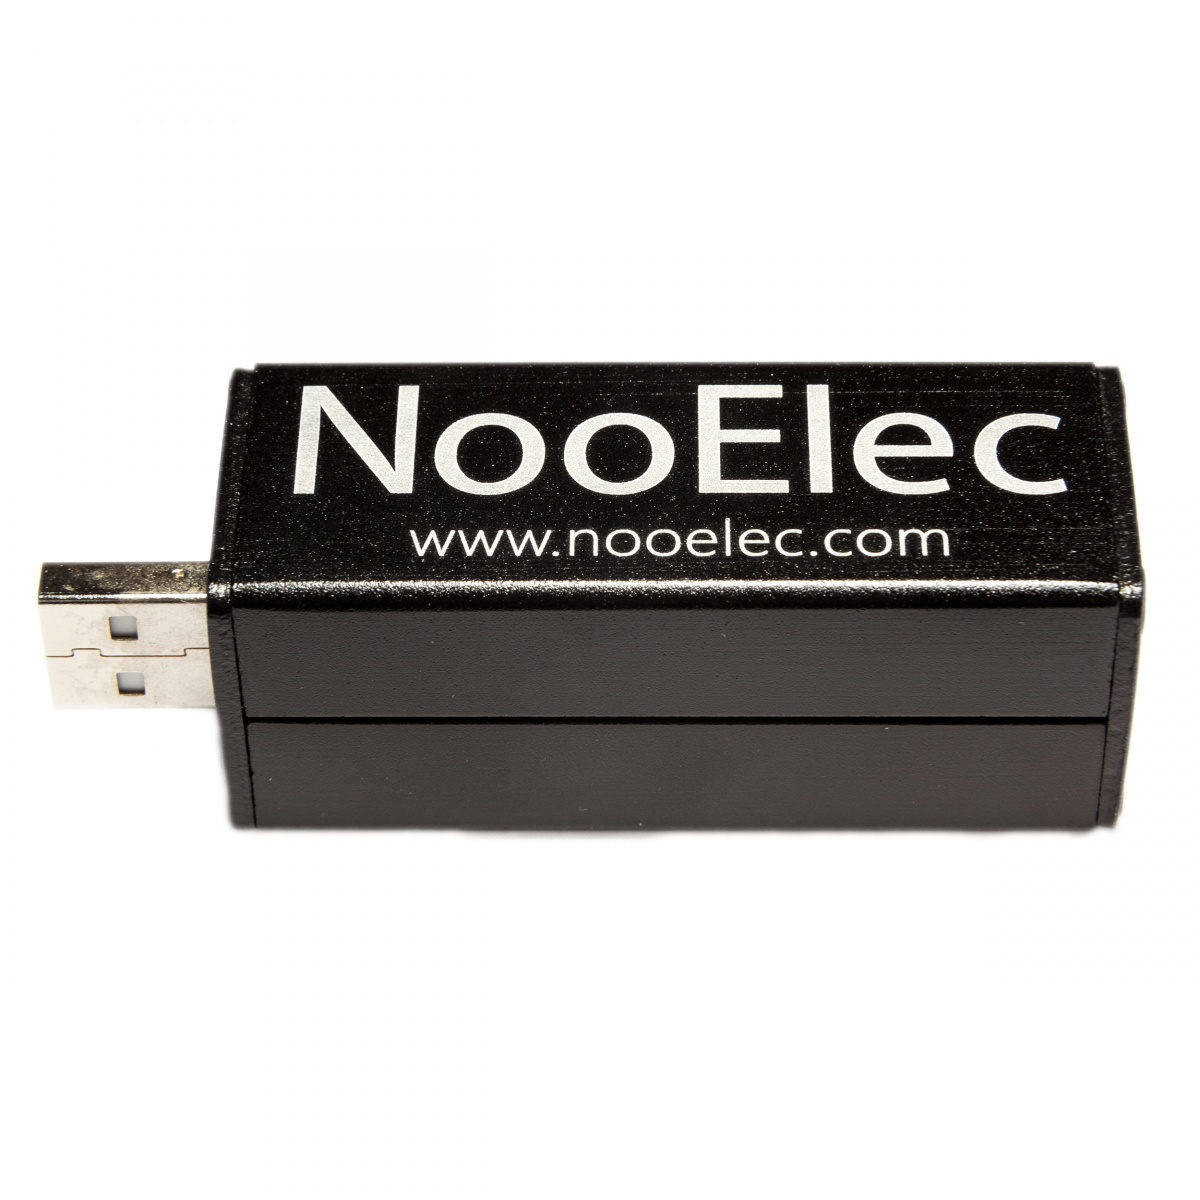 prioritet garage navneord Nooelec - Nooelec NESDR Mini+ Al - 0.5PPM TCXO USB RTL-SDR Receiver  (RTL2832 + R820T) w/ Antenna and Remote Control, Installed in Aluminum  Enclosure - NESDR RTL-SDR Receivers - SDR Receivers - Software Defined Radio